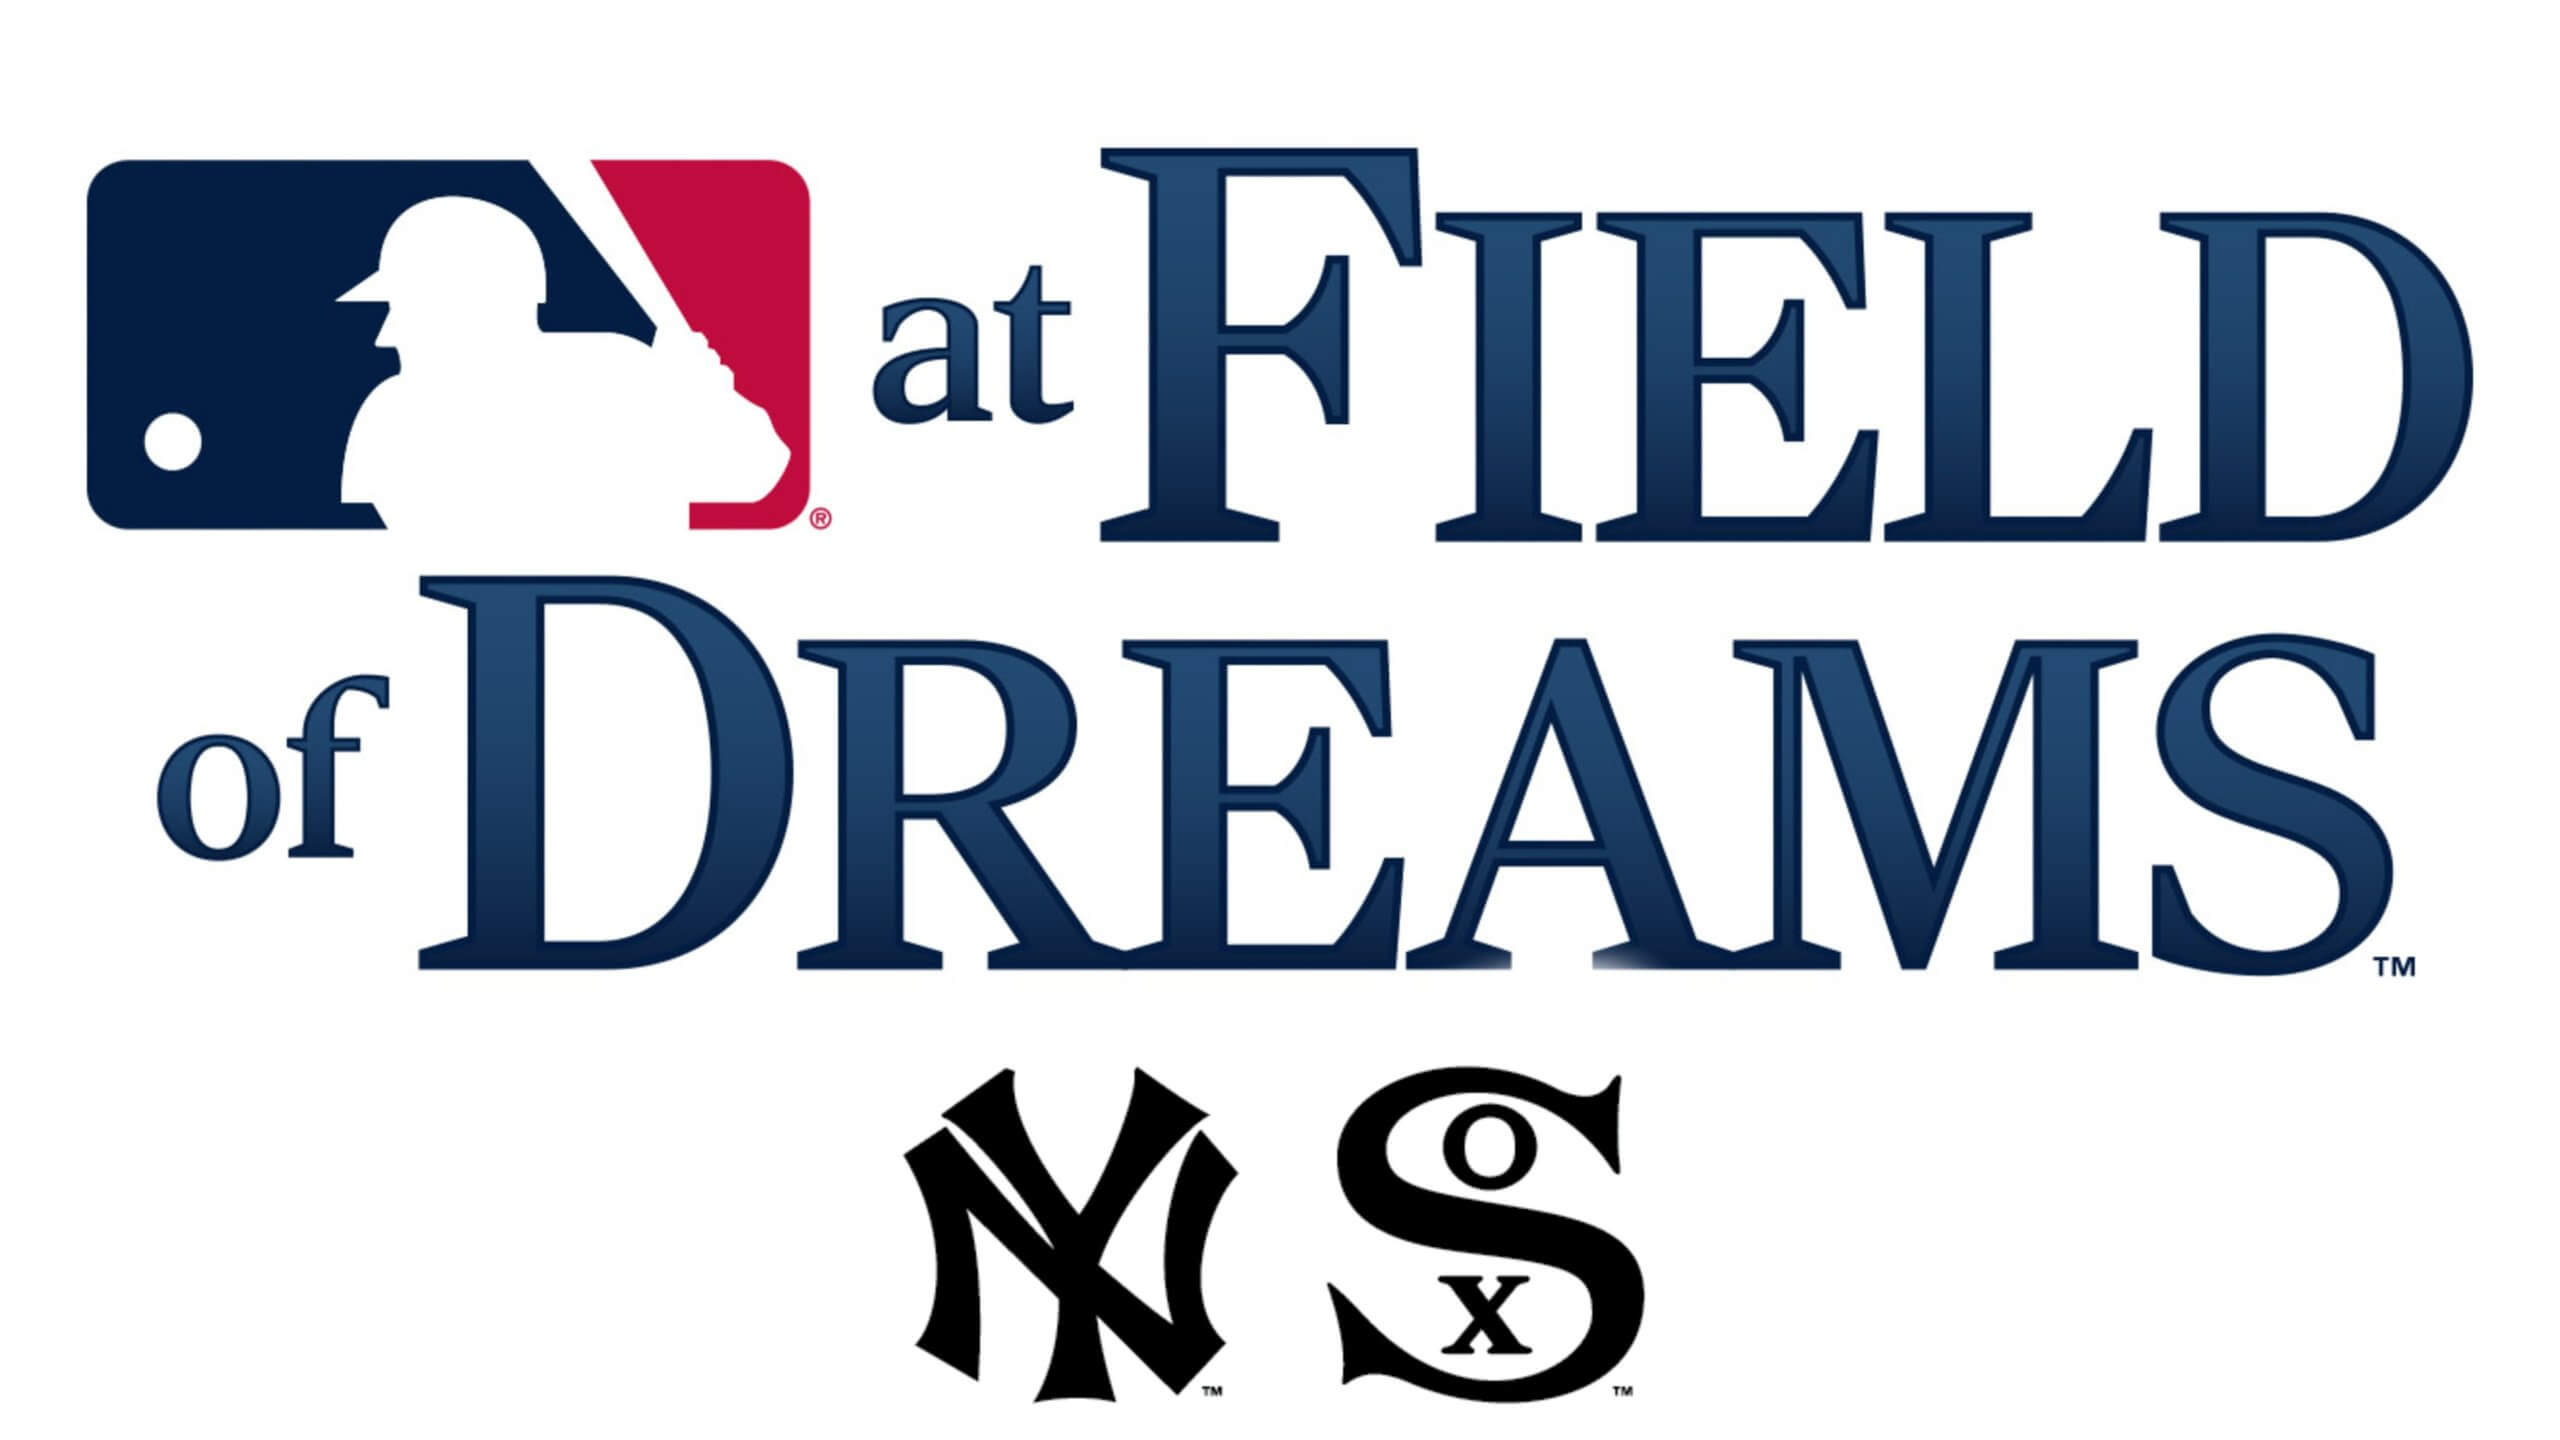 Yankees, White Sox to help bring back the magic in MLB's Field of